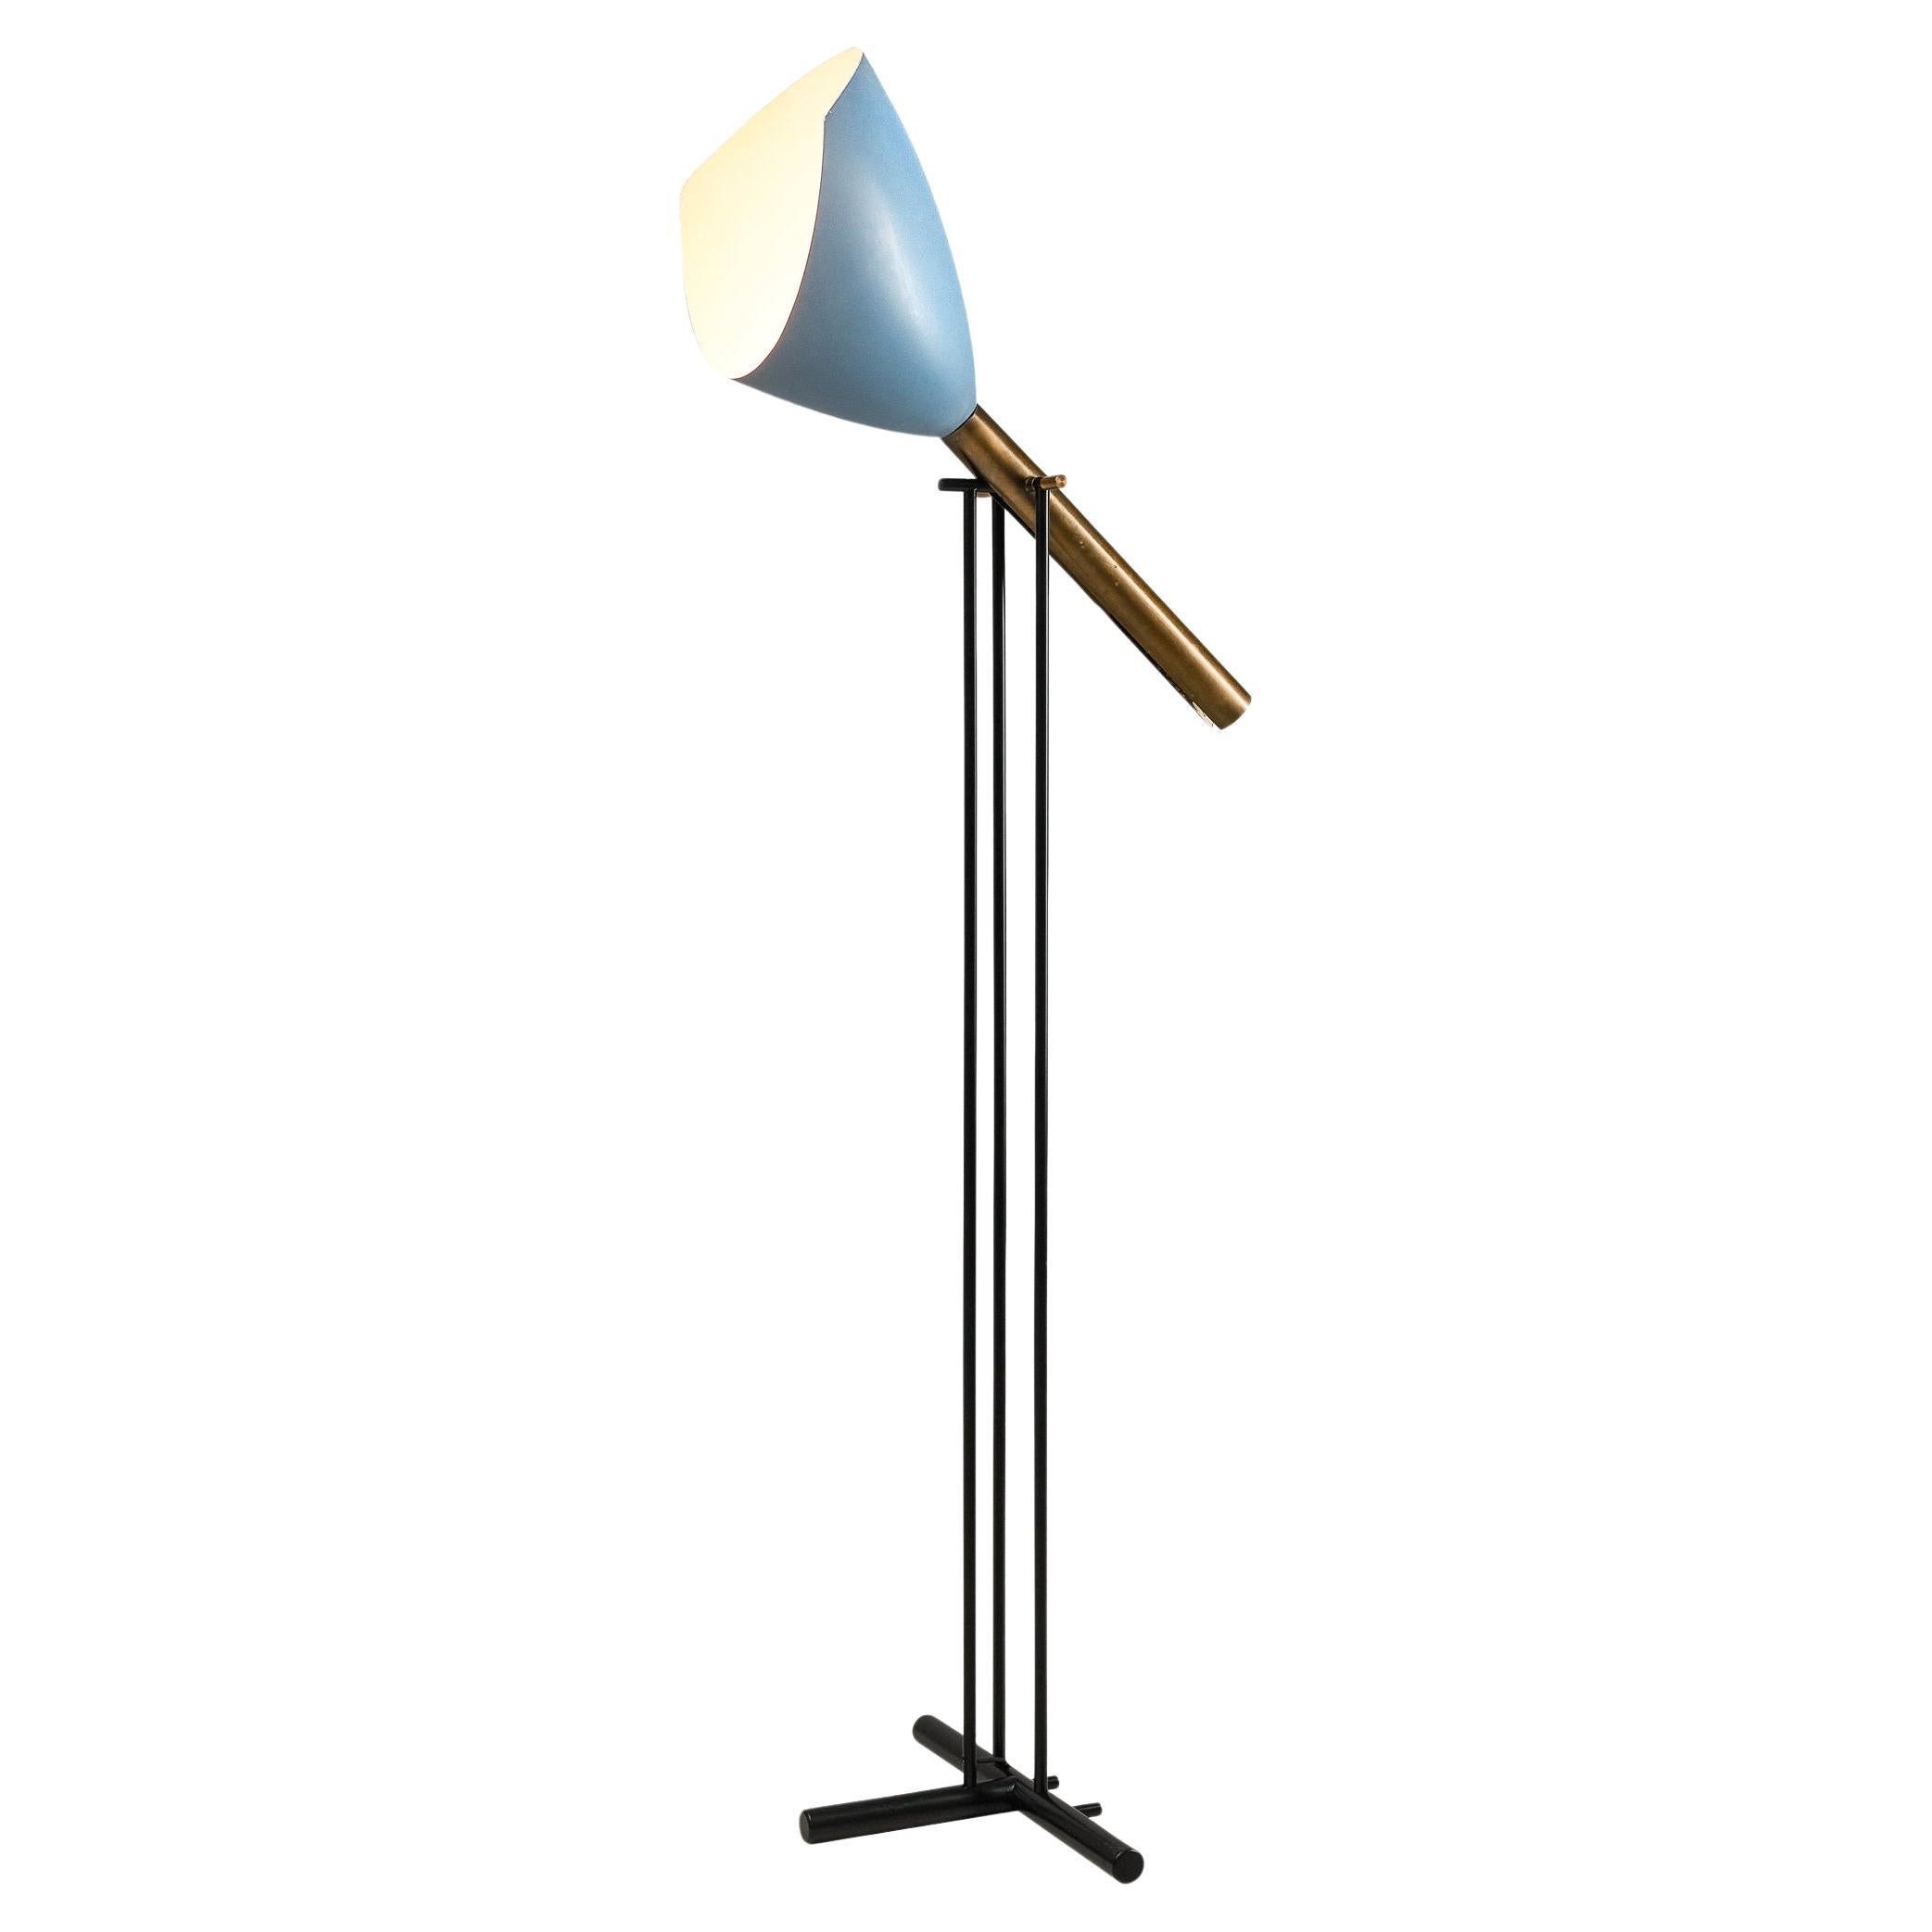 Angelo Lelii for Arredoluce ‘Televisione’ Floor Lamp in Brass and Aluminum  For Sale